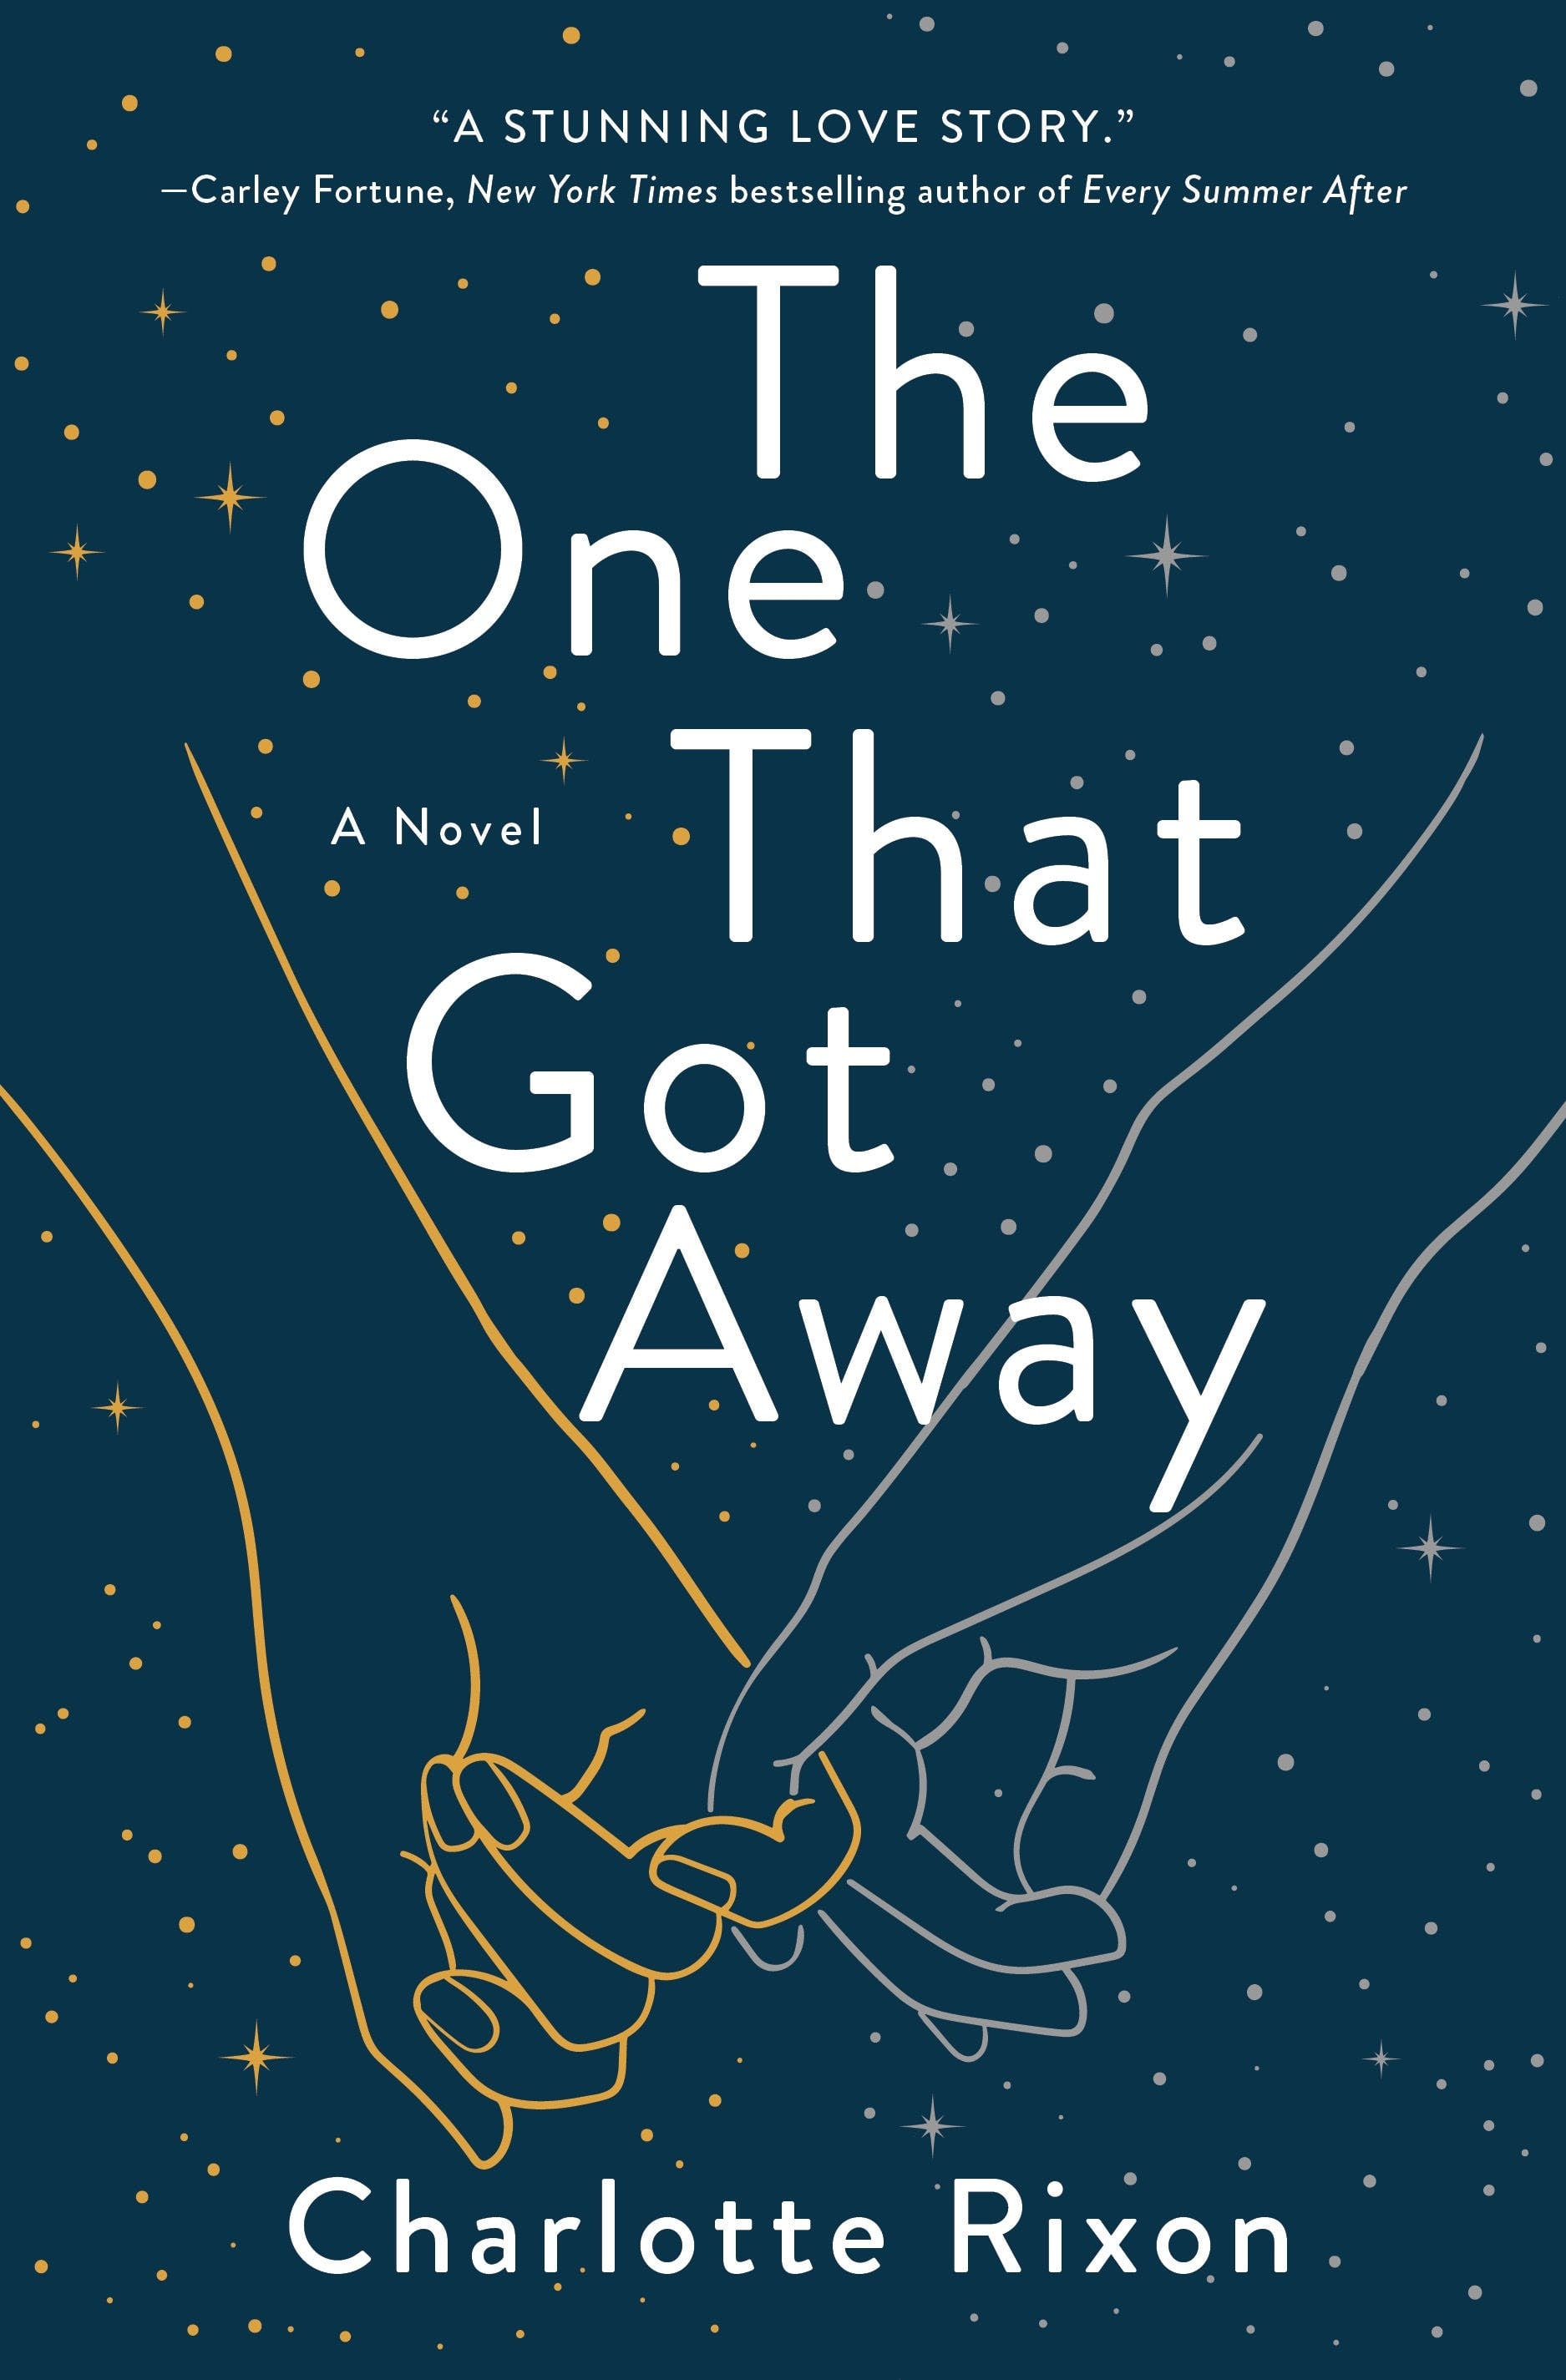 “The One That Got Away” by Charlotte Rixon